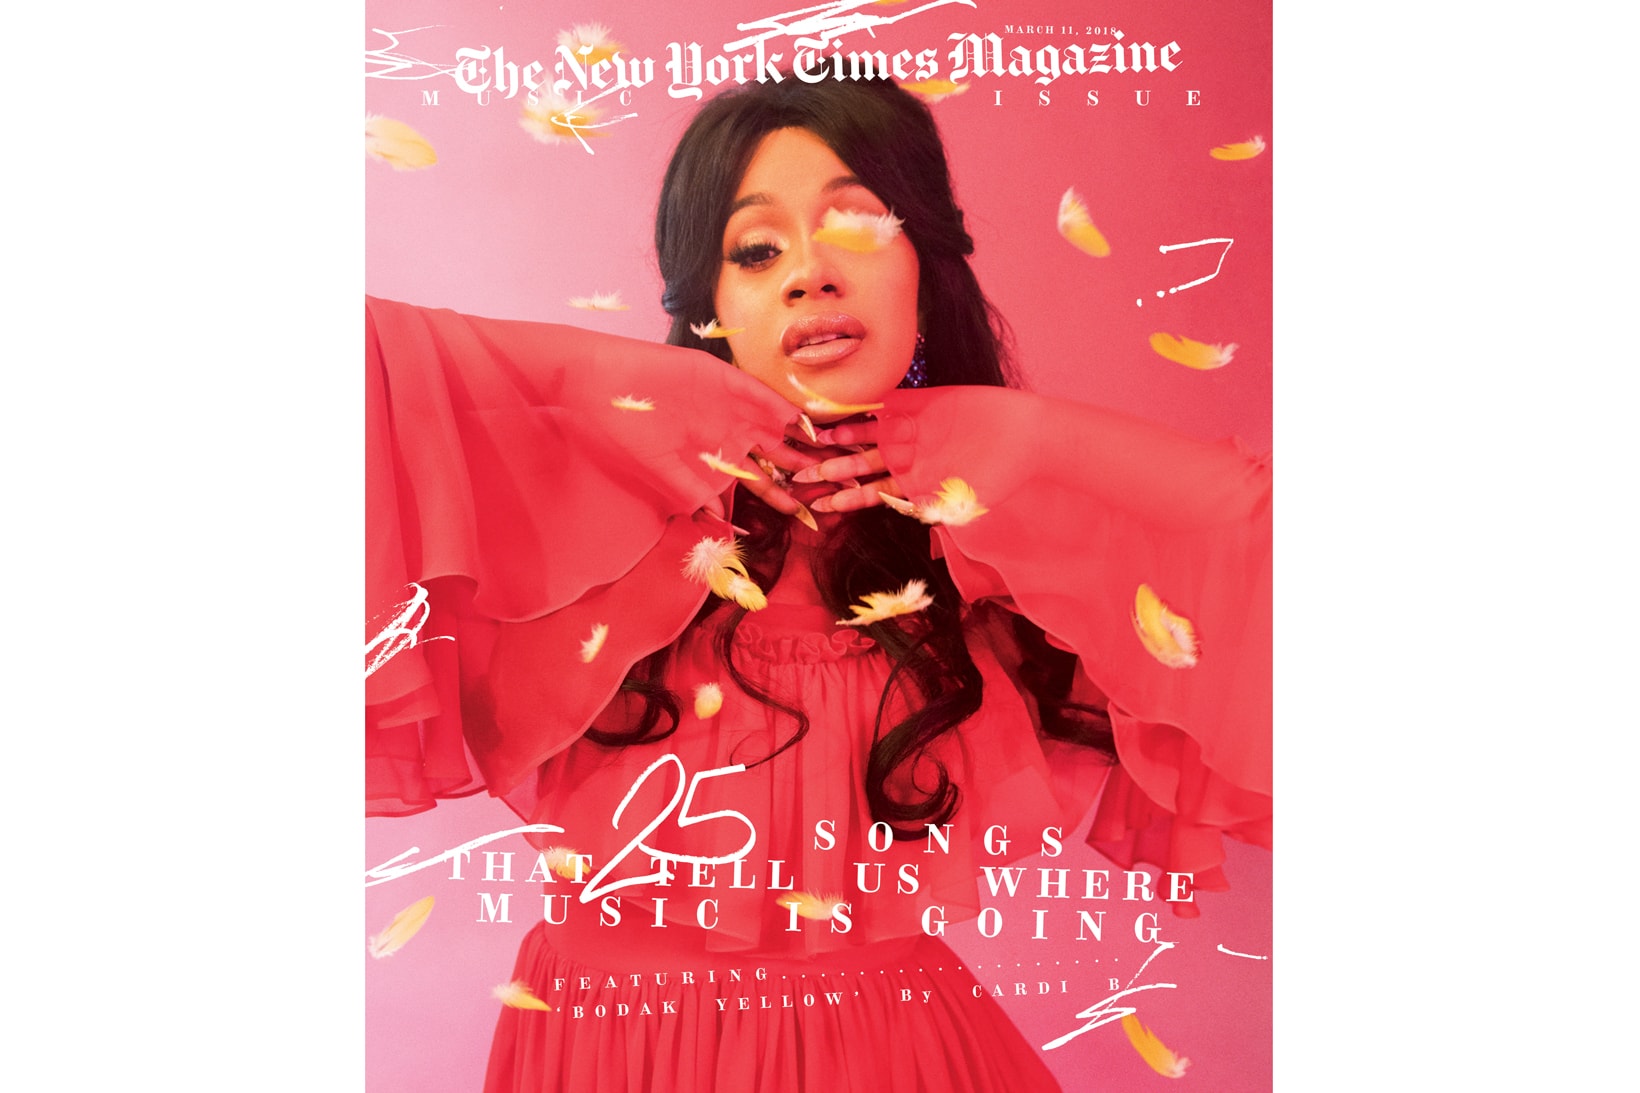 Cardi B The New York Times Magazine March 2018 Music Issue Cover